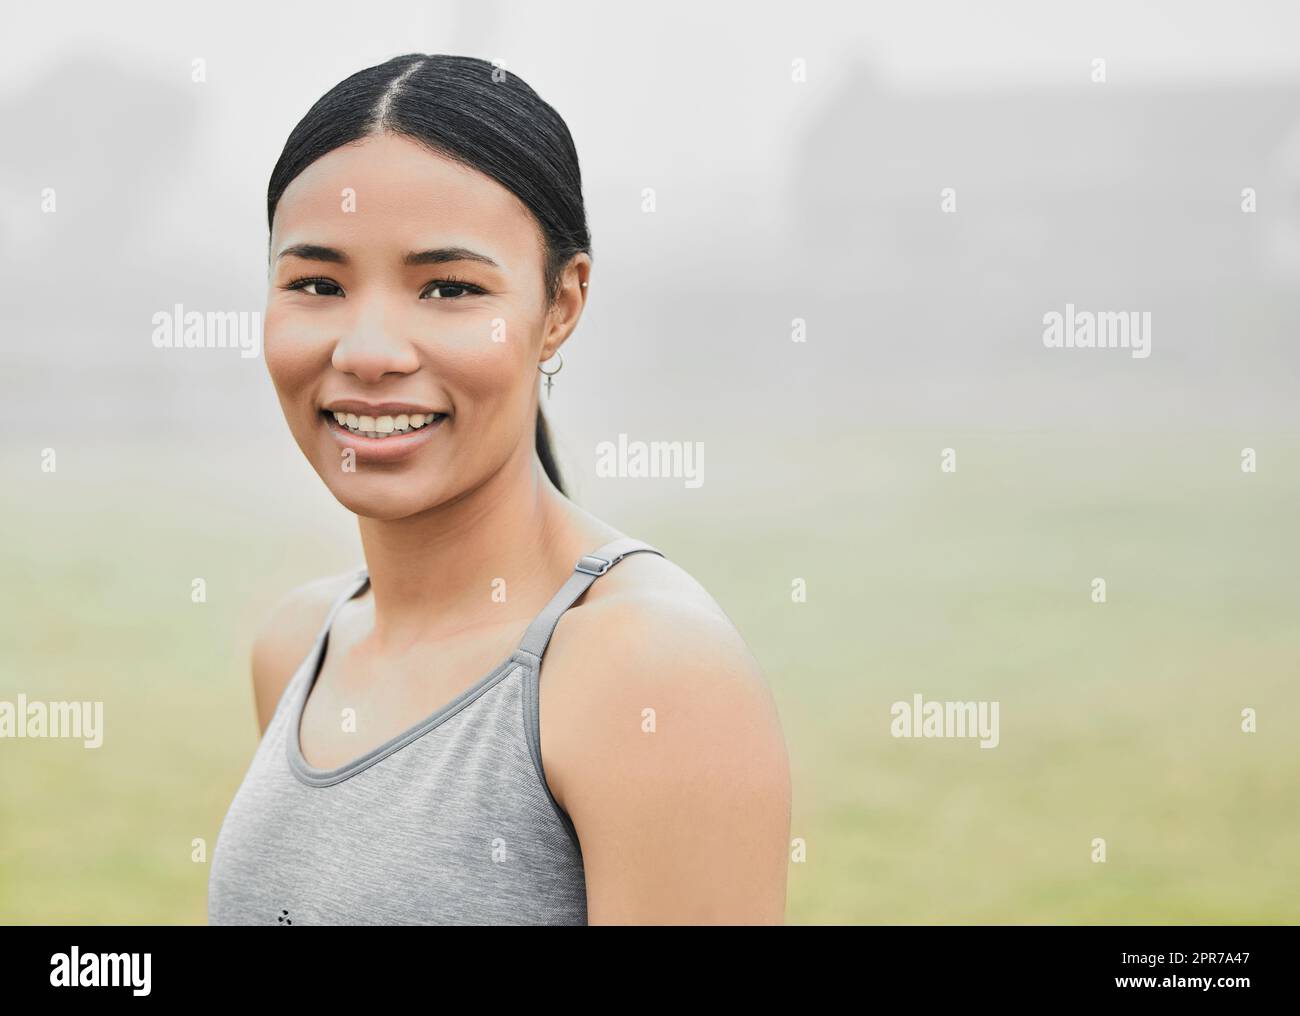 Working out always puts me in a good mood. Cropped portrait of an attractive young female athlete exercising outside. Stock Photo